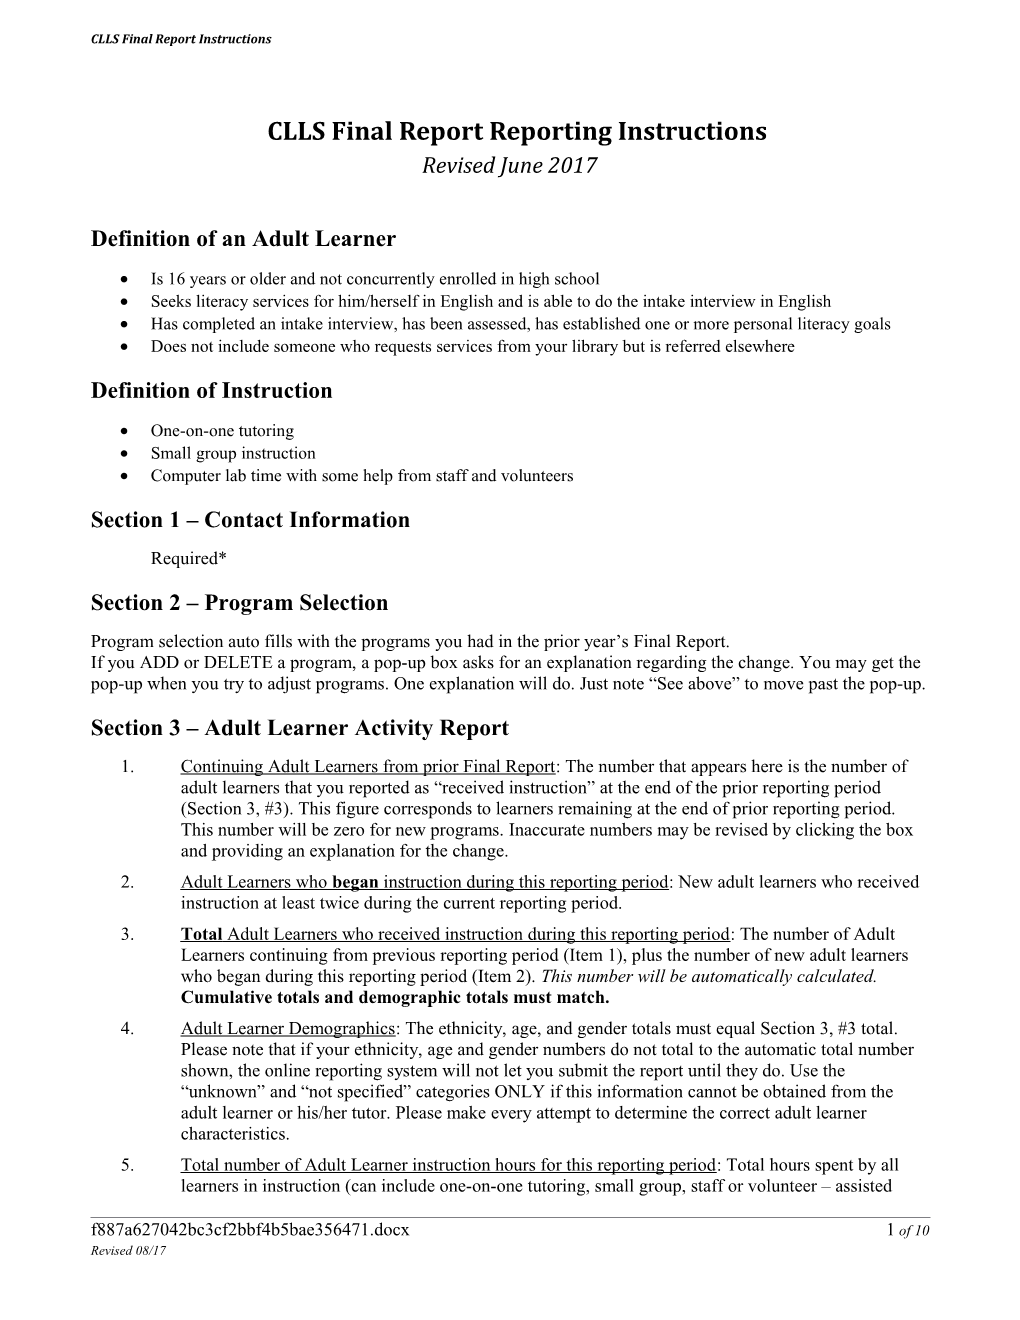 CLLS Final Report Reporting Instructions